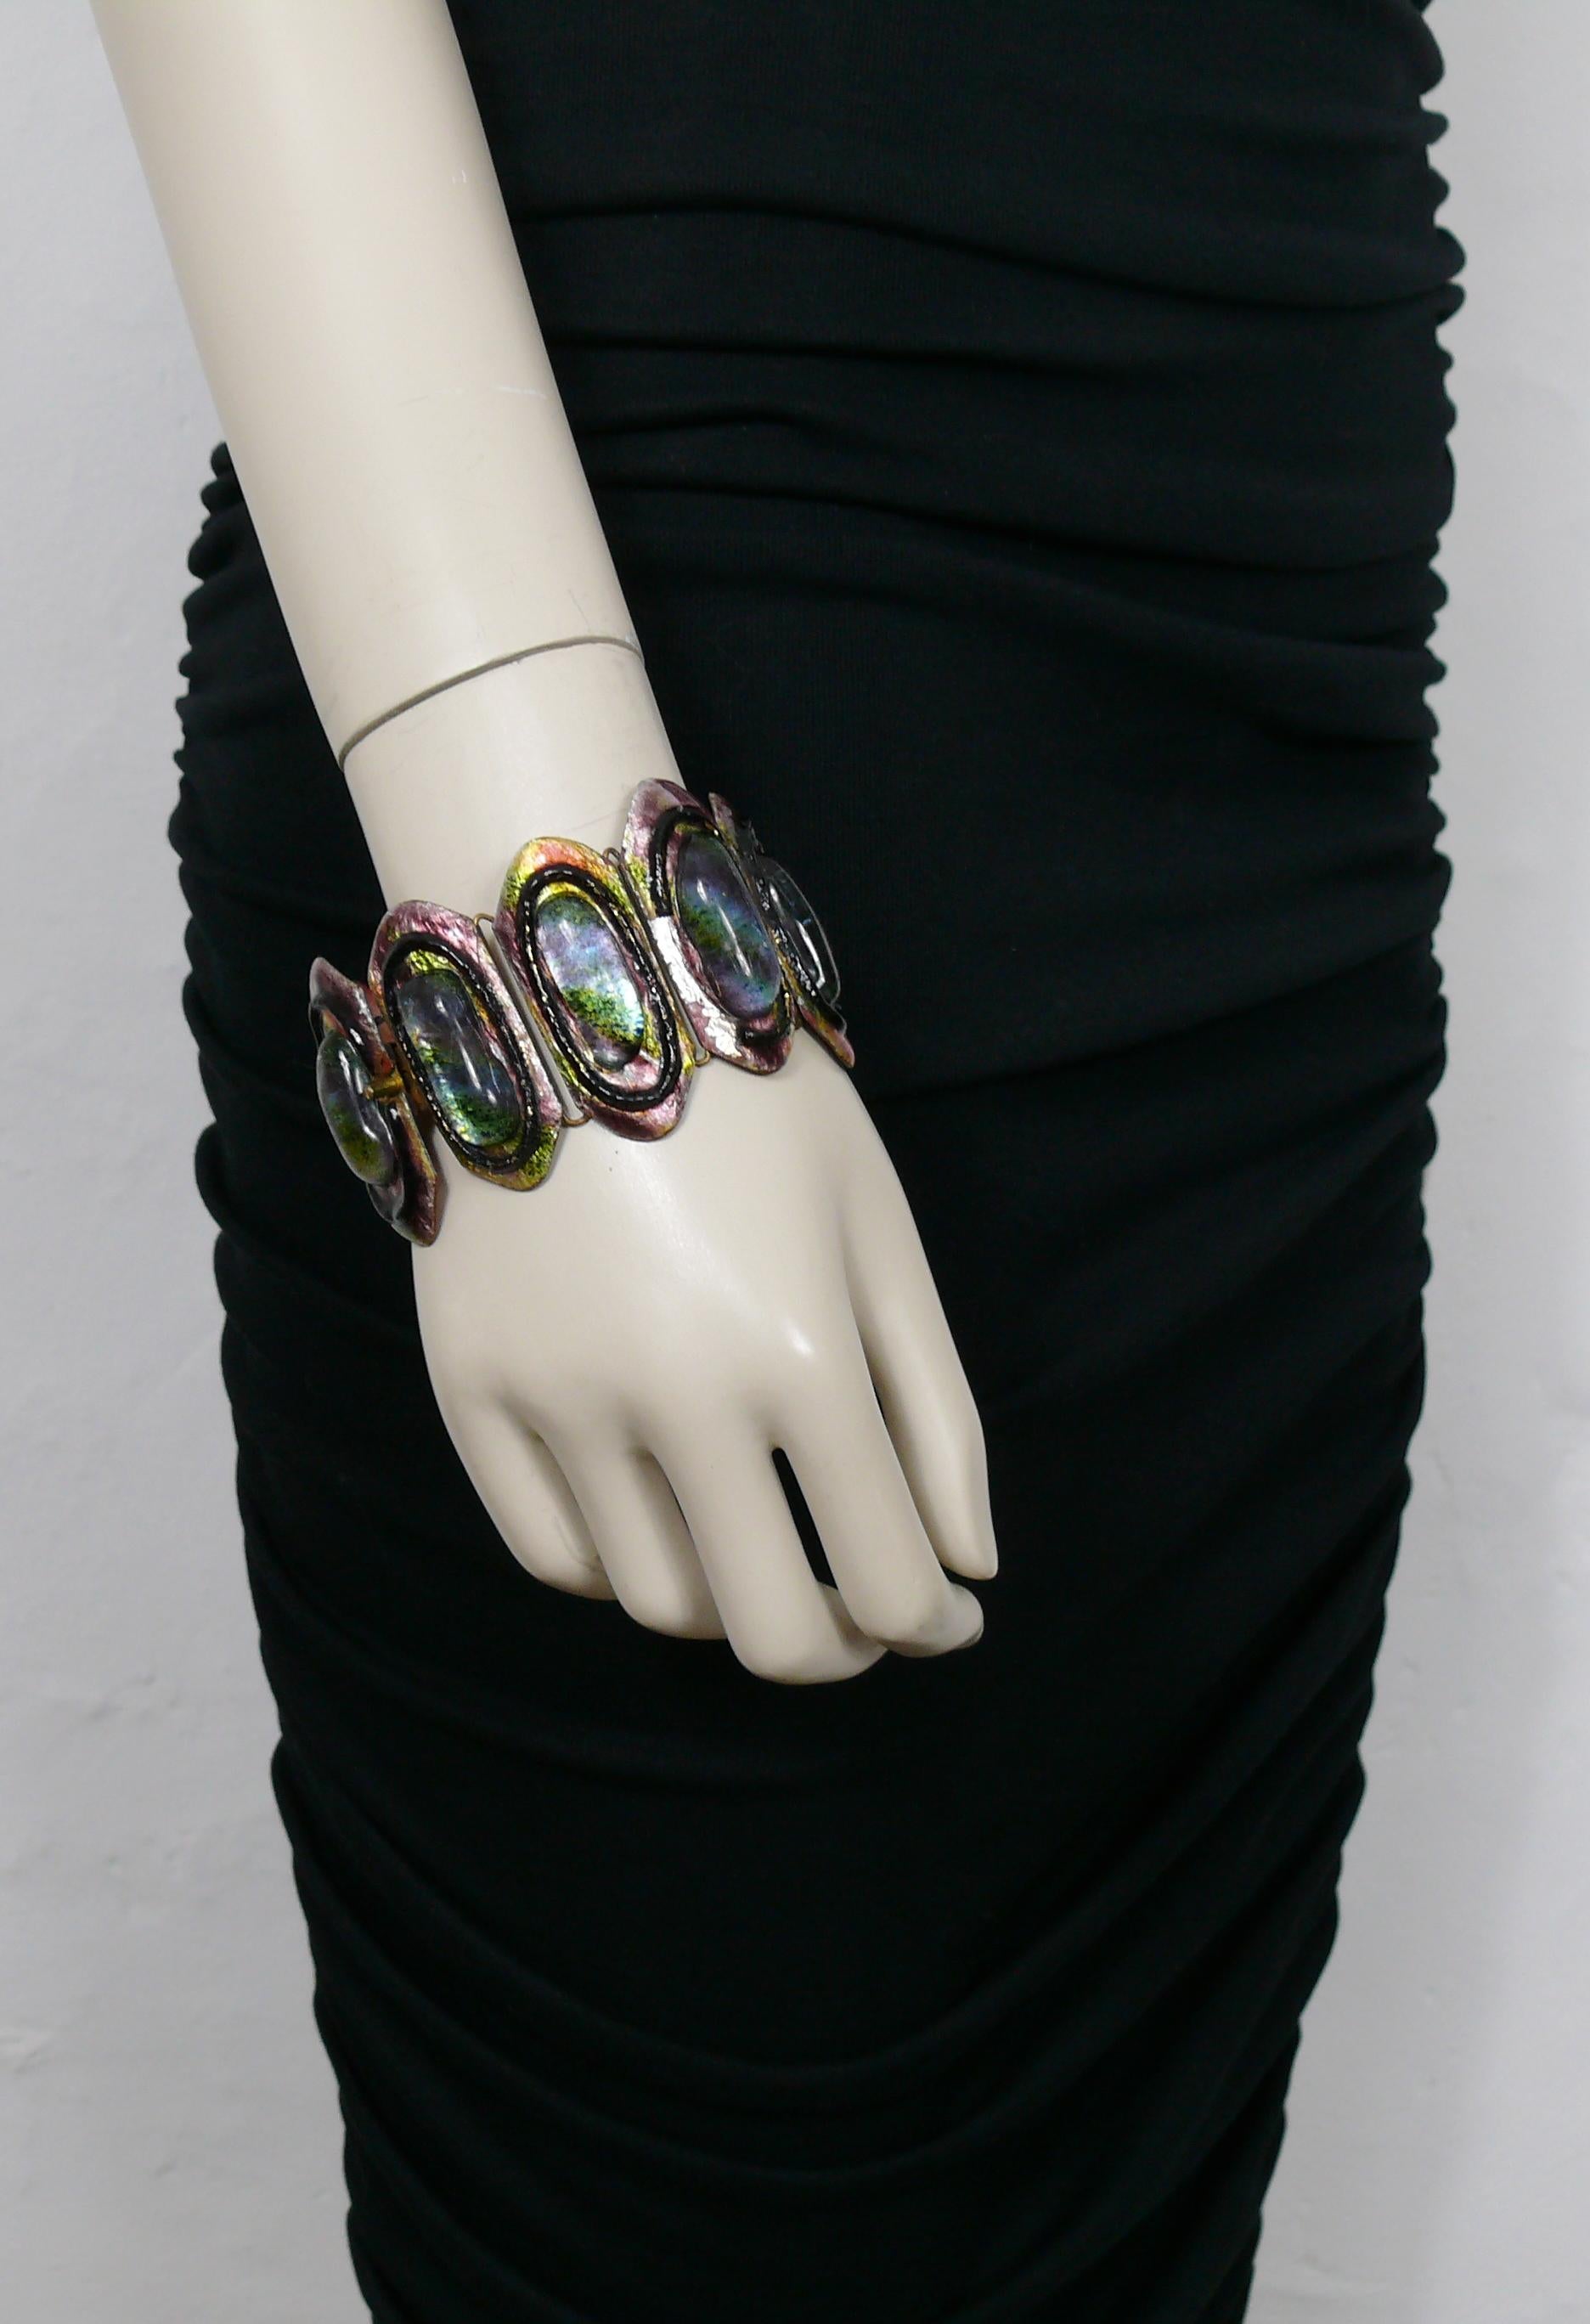 ANDREE BAZOT vintage bracelet featuring multicolored enameled links embellished with glass cabochons.

Signed ANDREE BAZOT.

Indicative measurements : circumference approx. 20.10 cm (7.91 inches) / width of the links max. 4.8 cm (1.89